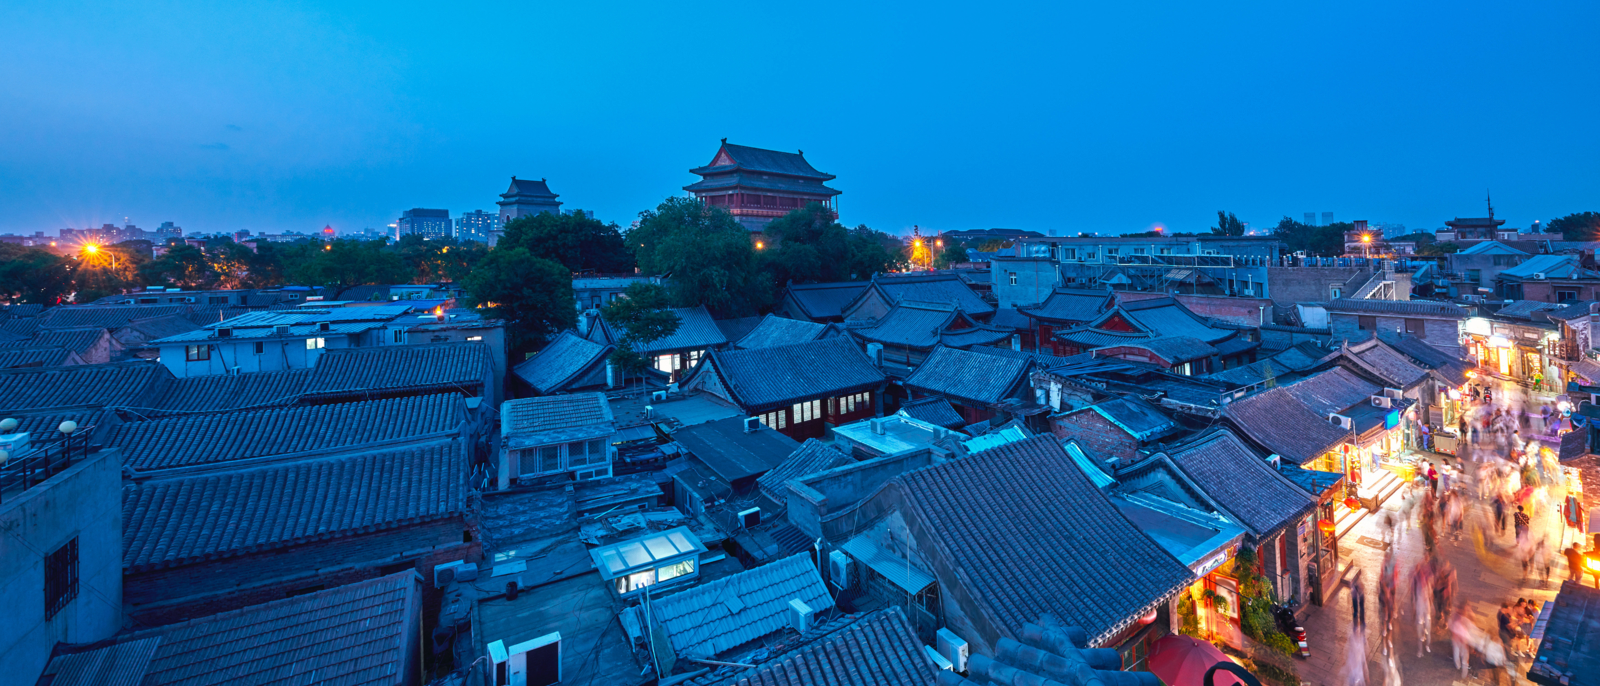 Beijing's old town at sunset in blue sky, China